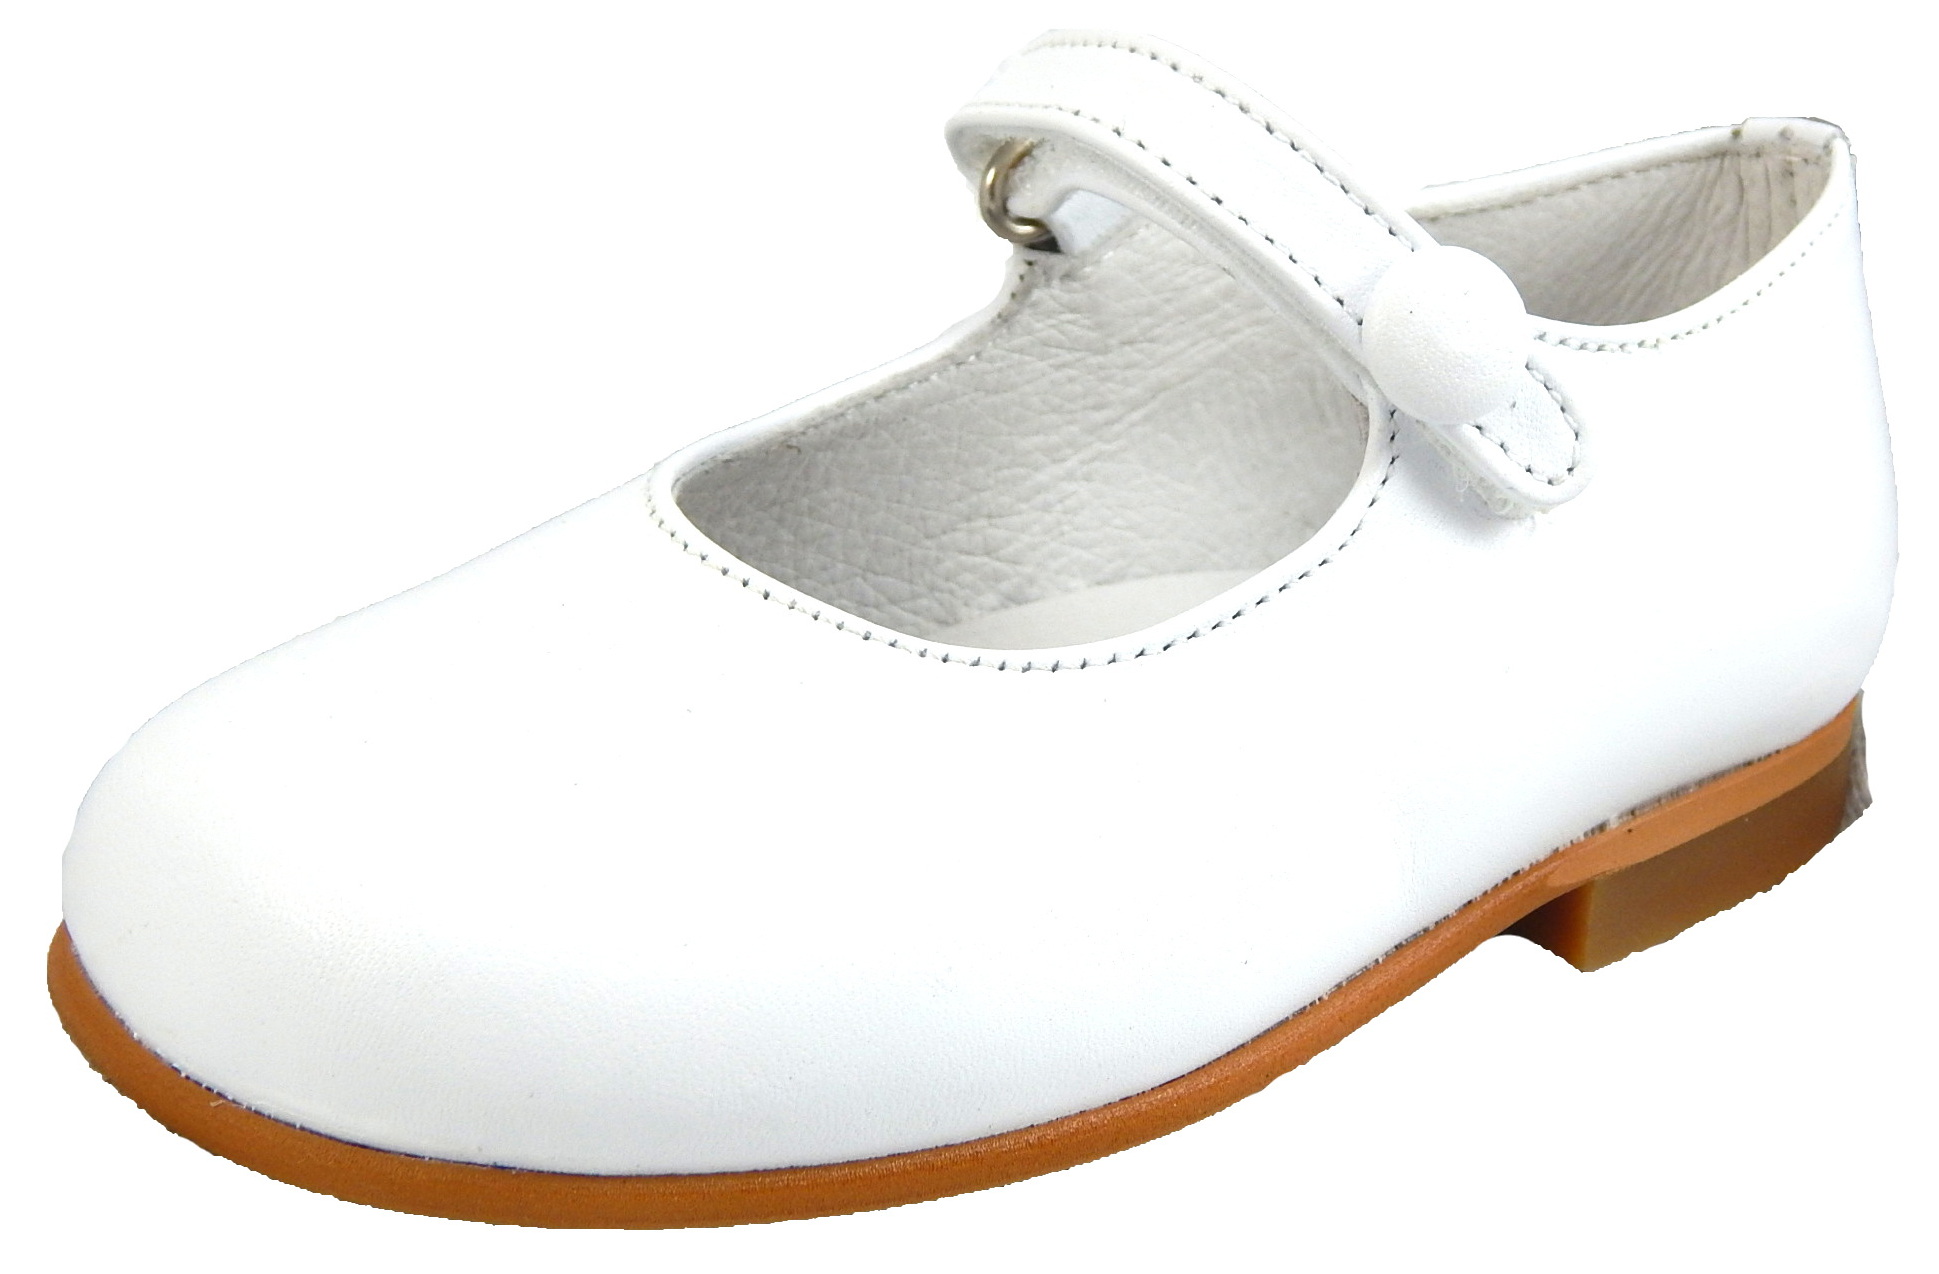 P-2550 - White Button Mary Janes